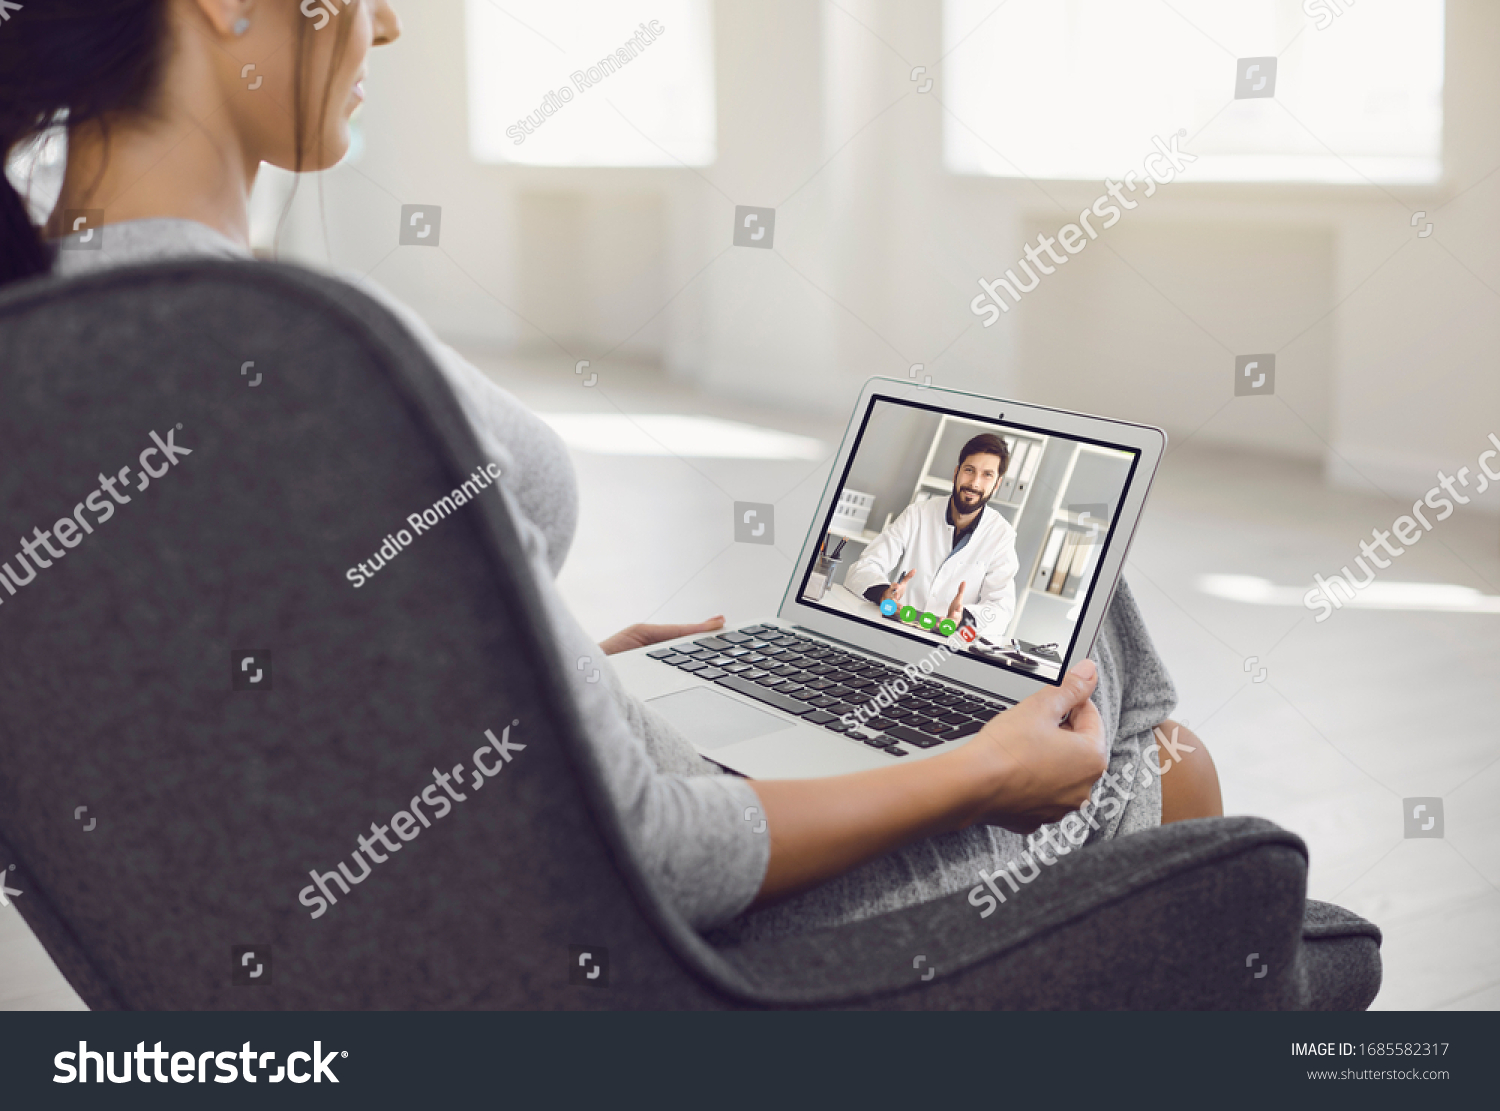 Online doctor.A sick young woman video chat with a male doctor at home. #1685582317